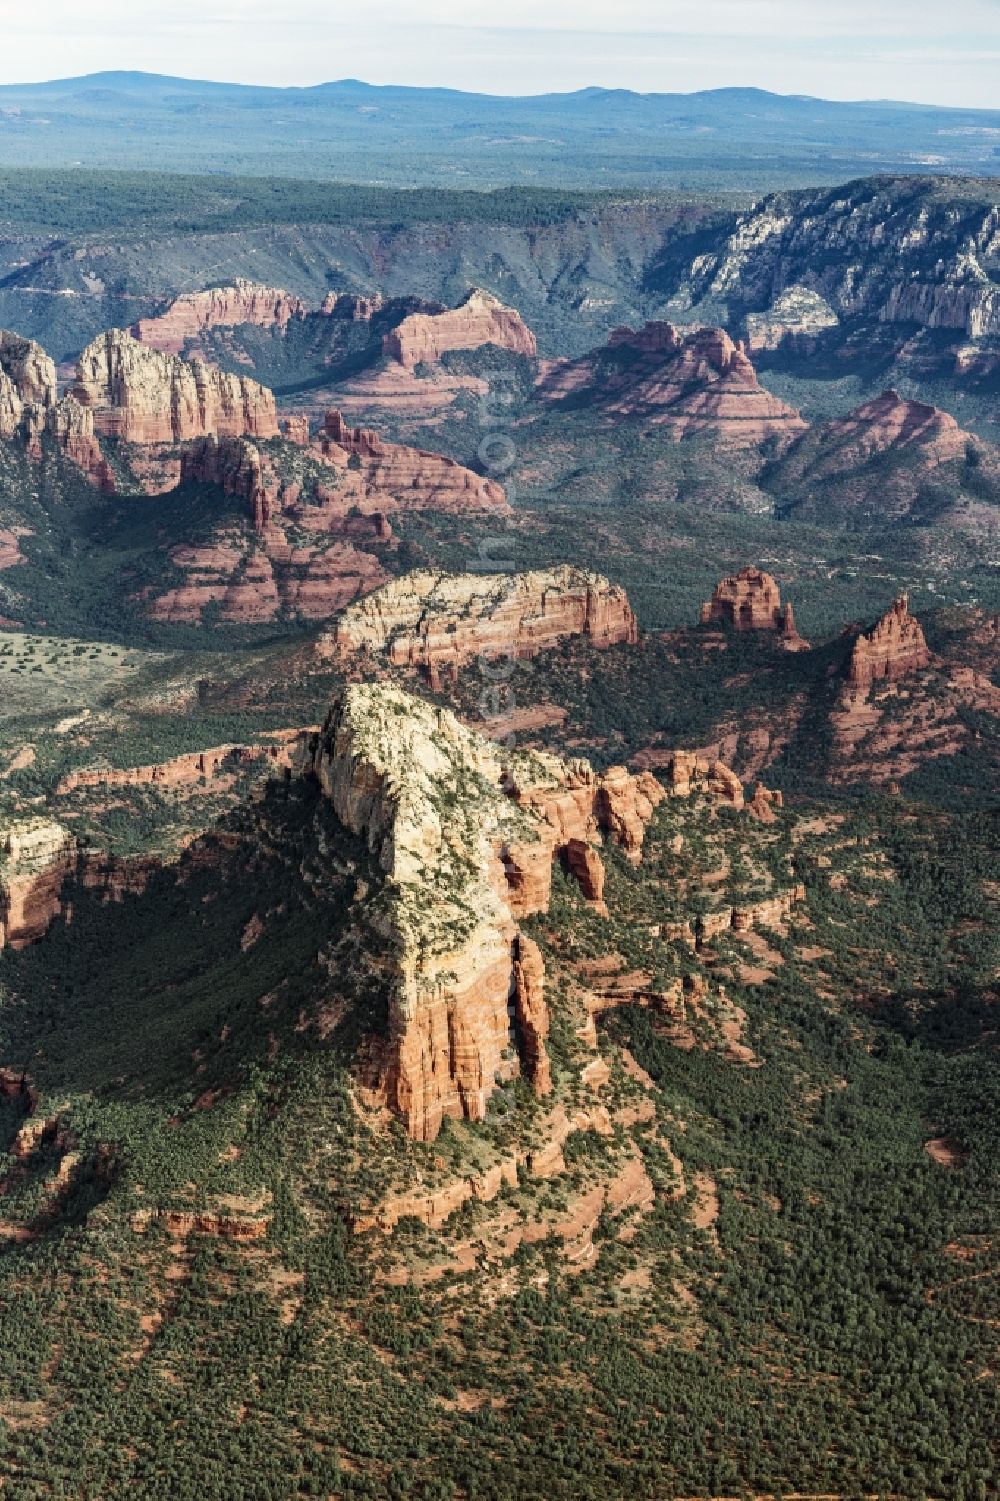 Aerial image Sedona - Valley landscape surrounded by mountains in Sedona in Arizona, United States of America